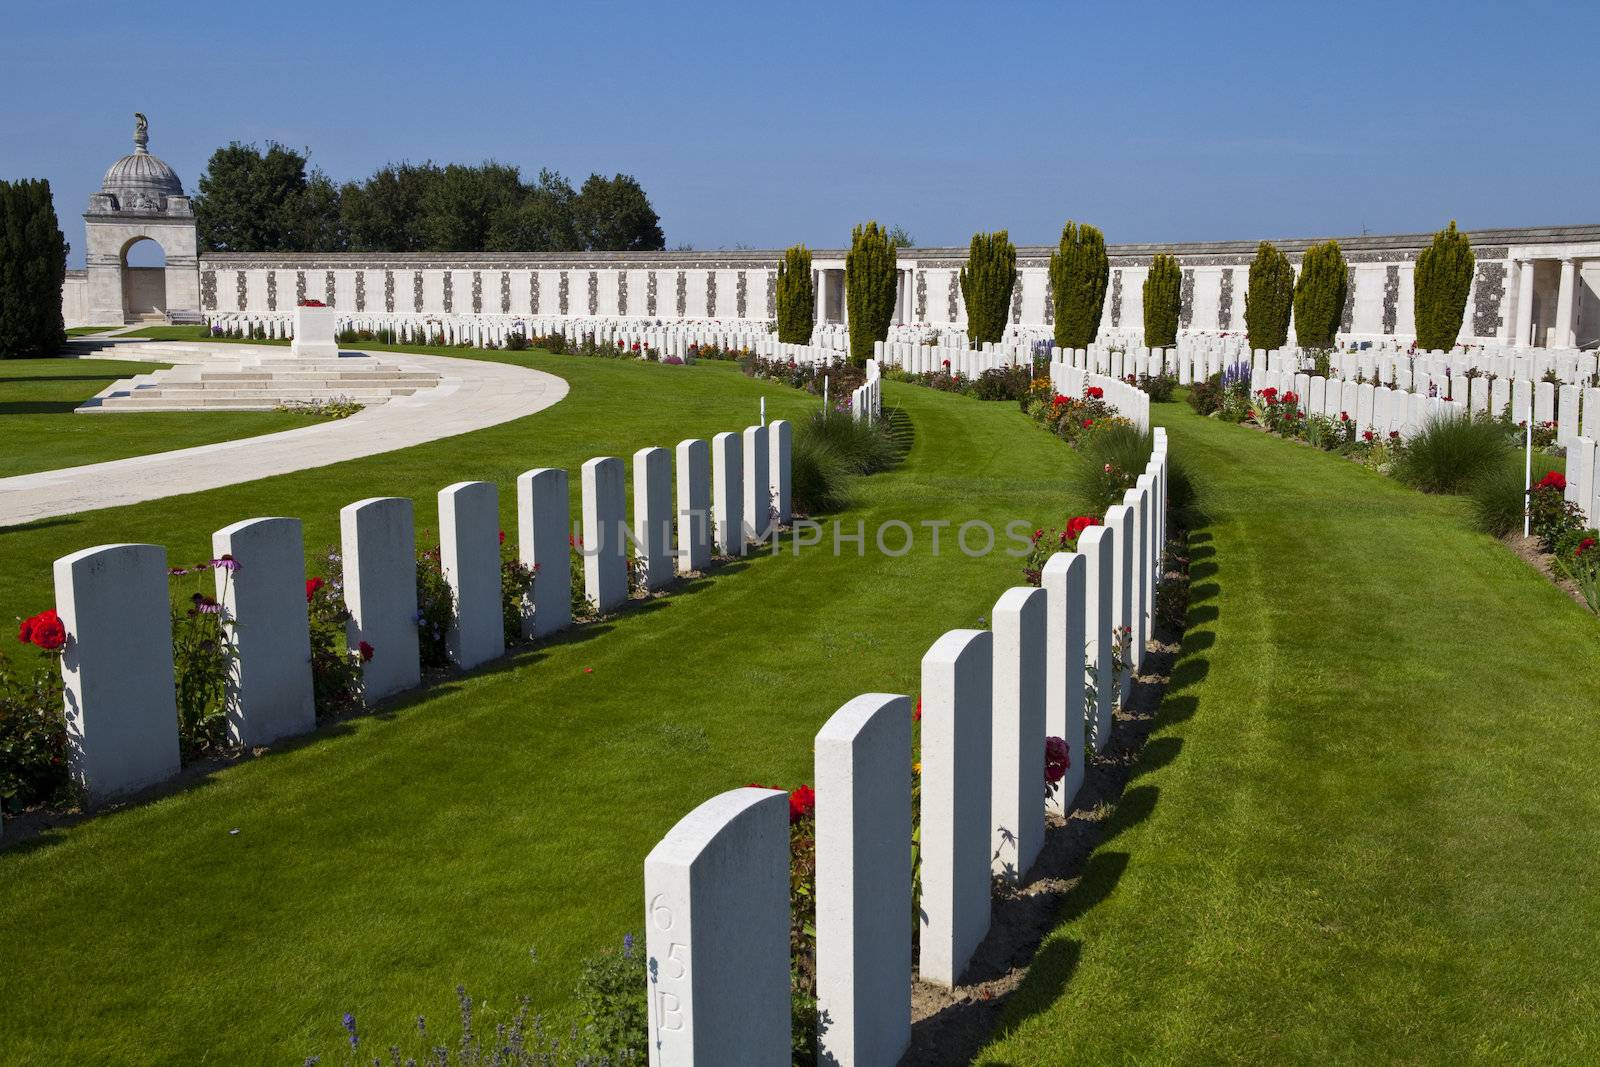 Tyne Cot Cemetery in Ypres, Belgium.  Tyne Cot Commonwealth War Graves Cemetery and Memorial to the Missing is a Commonwealth War Graves Commission (CWGC) burial ground for the dead of the First World War in the Ypres Salient on the Western Front.